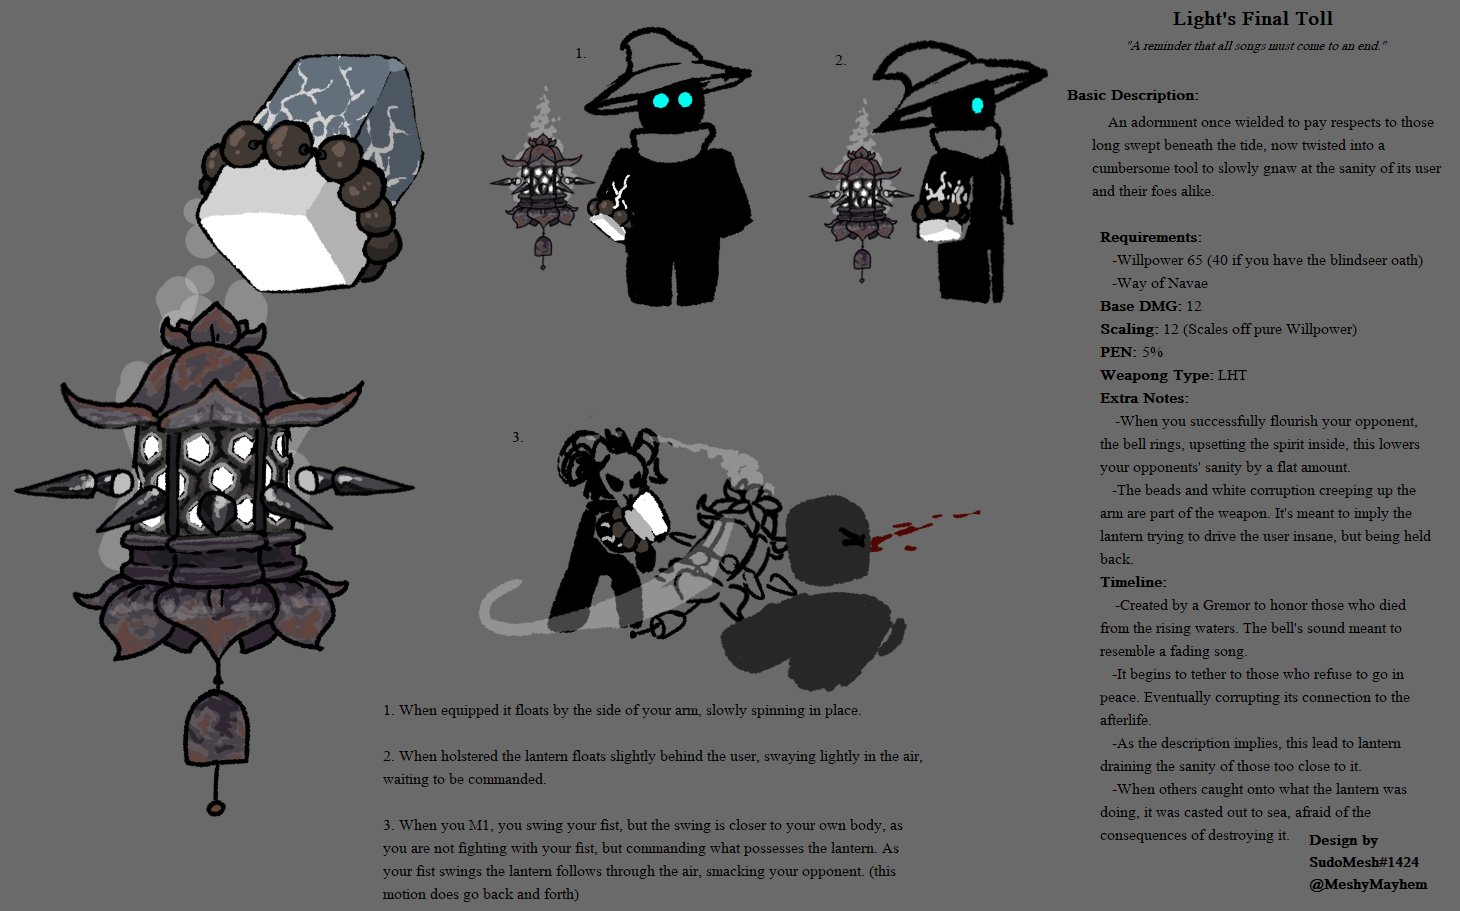 Deepwoken on X: Congratulations to the winners of the second Deepwoken  Community Fan Art Contest! This contest's theme was Weapon Concepts.  First place goes to @Meshymayhem with the mysterious Light's Final Toll